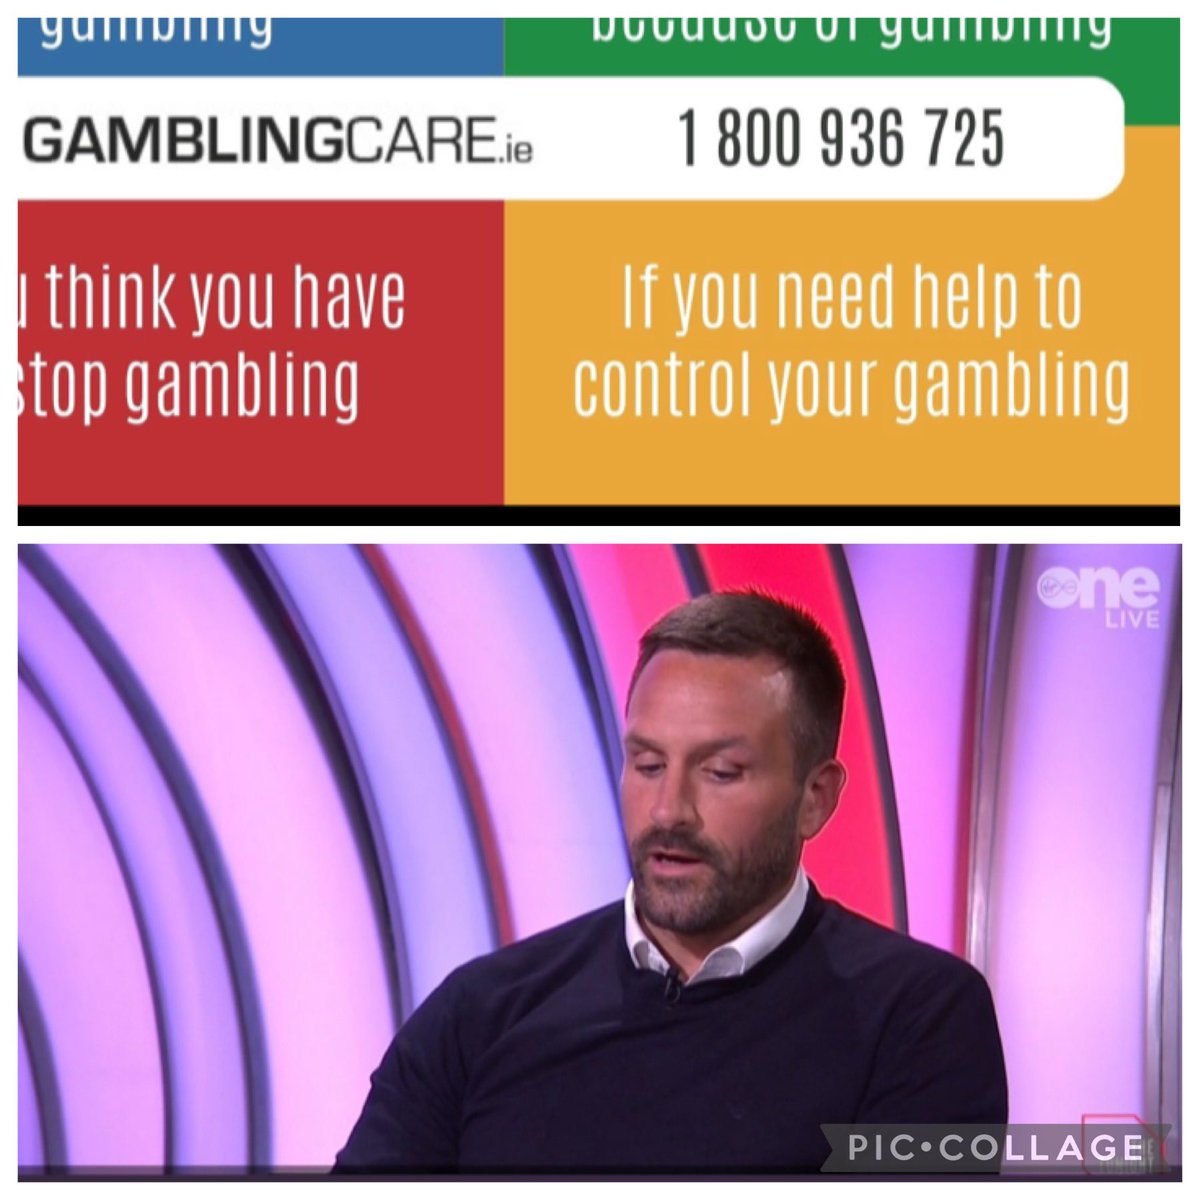 This is what I have a huge problem with & believe is incredibly harmful ! “If you need help to control your gambling” Could you imagine if you saw an advert saying “If you need help to control your heroin consumption” Gambling “Care” Ireland are funded by the Gambling…